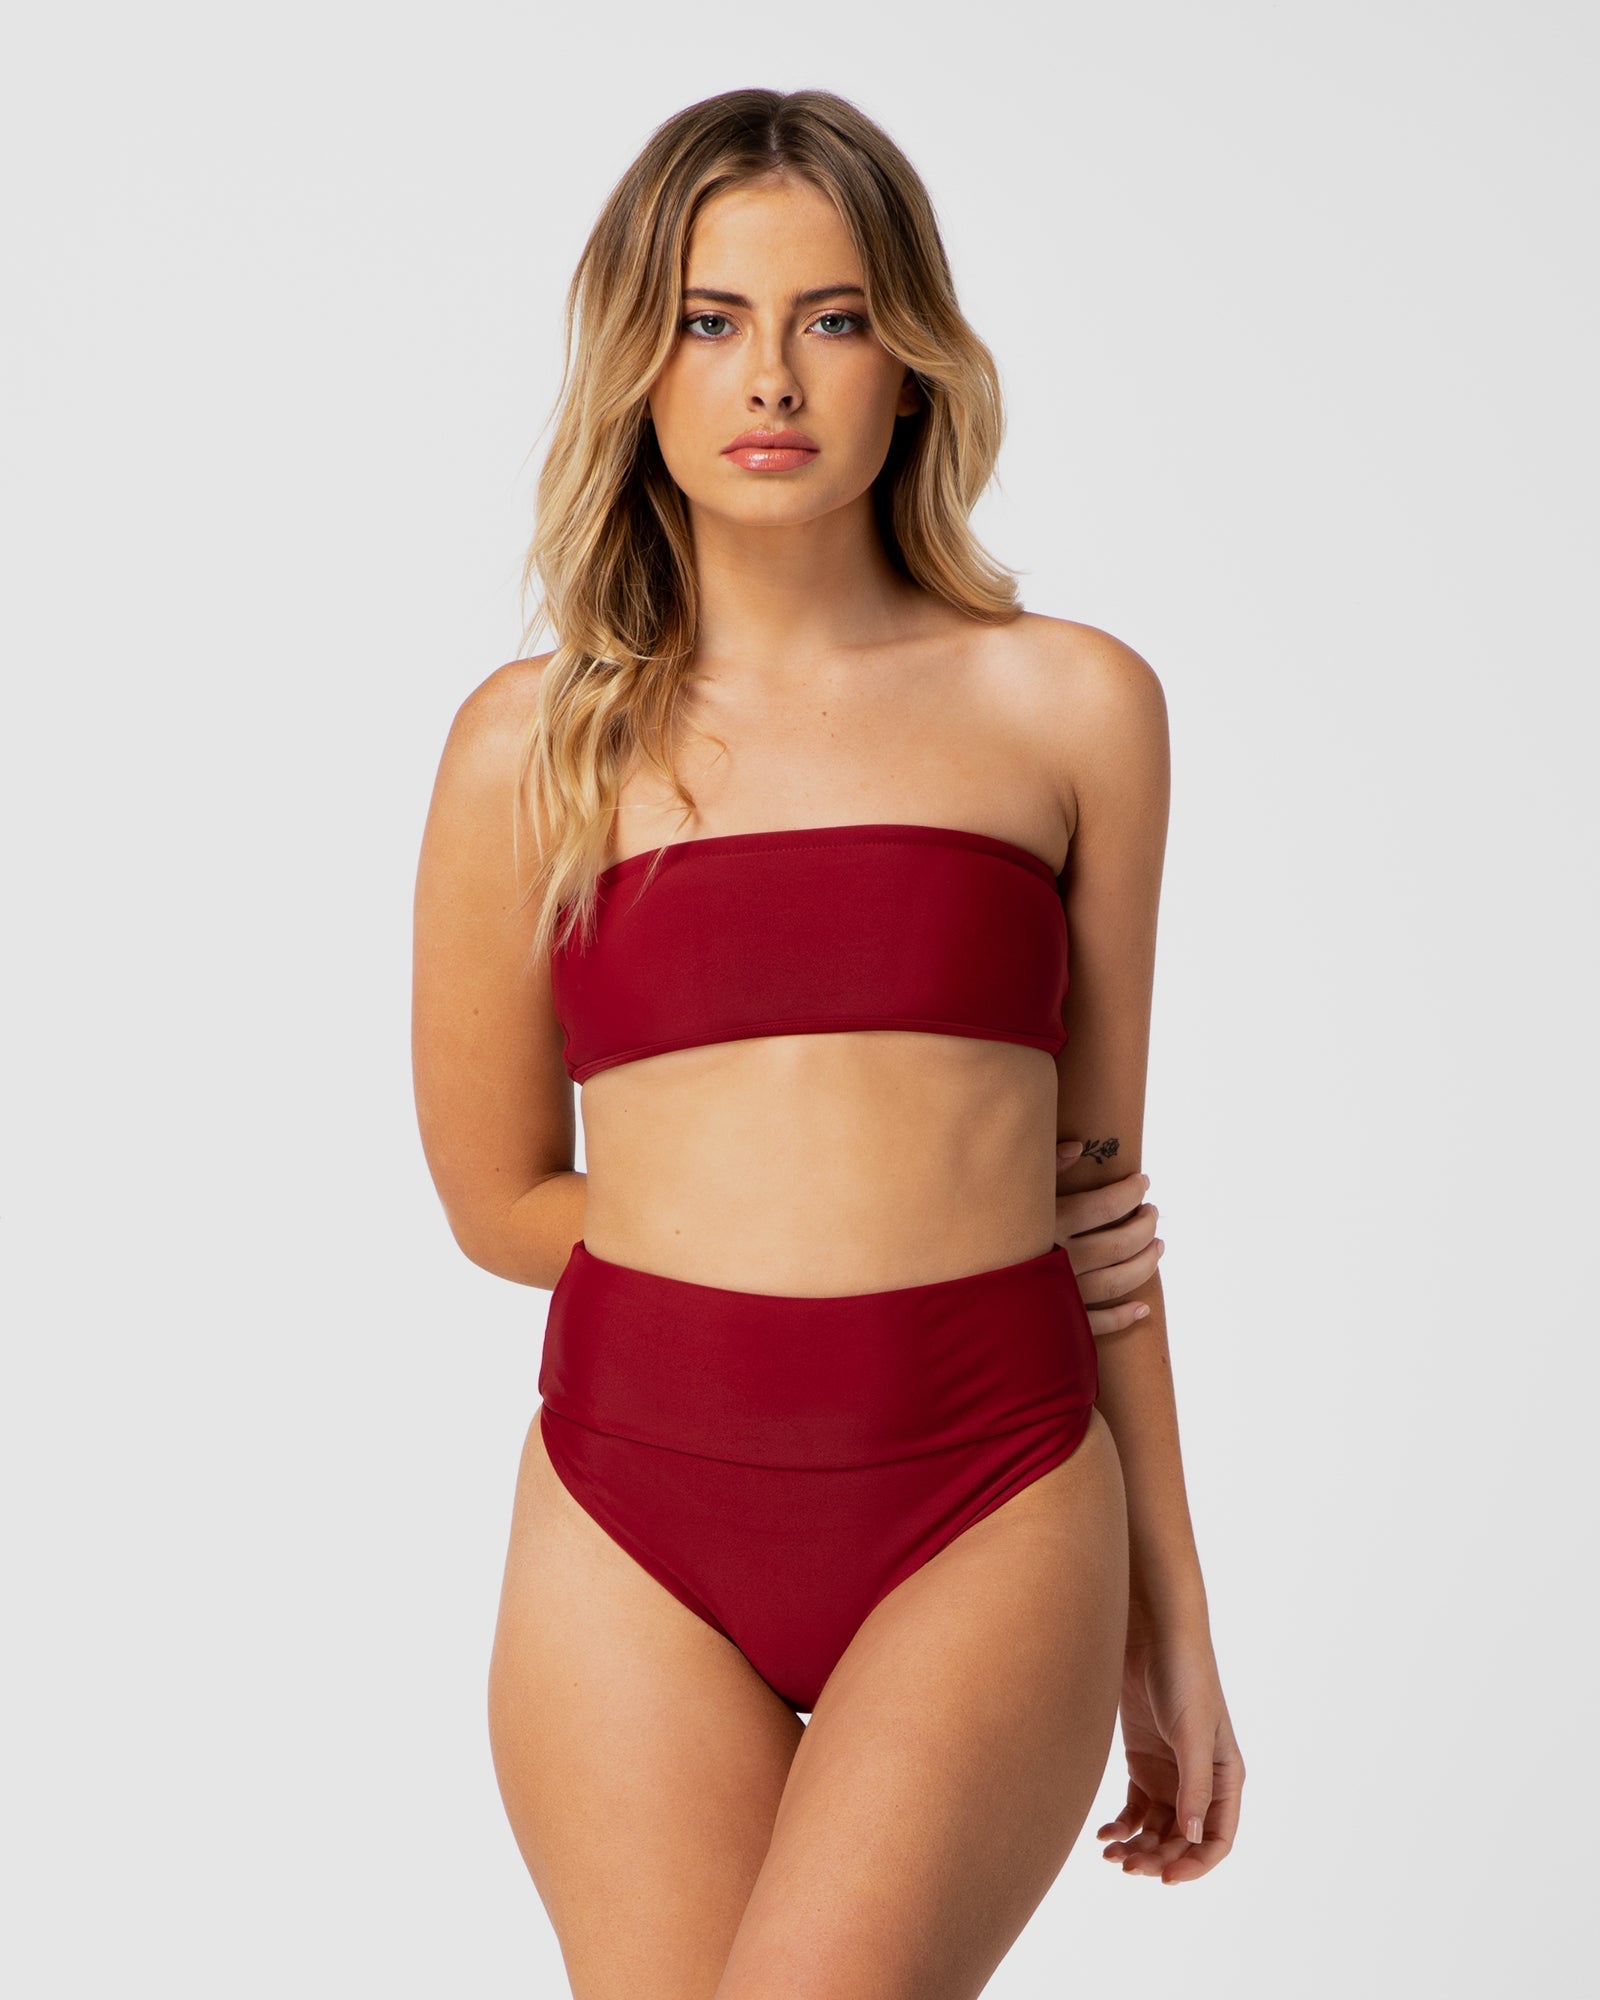 Discover the Best Ethical and Eco-Friendly Swimwear Brands in Australia